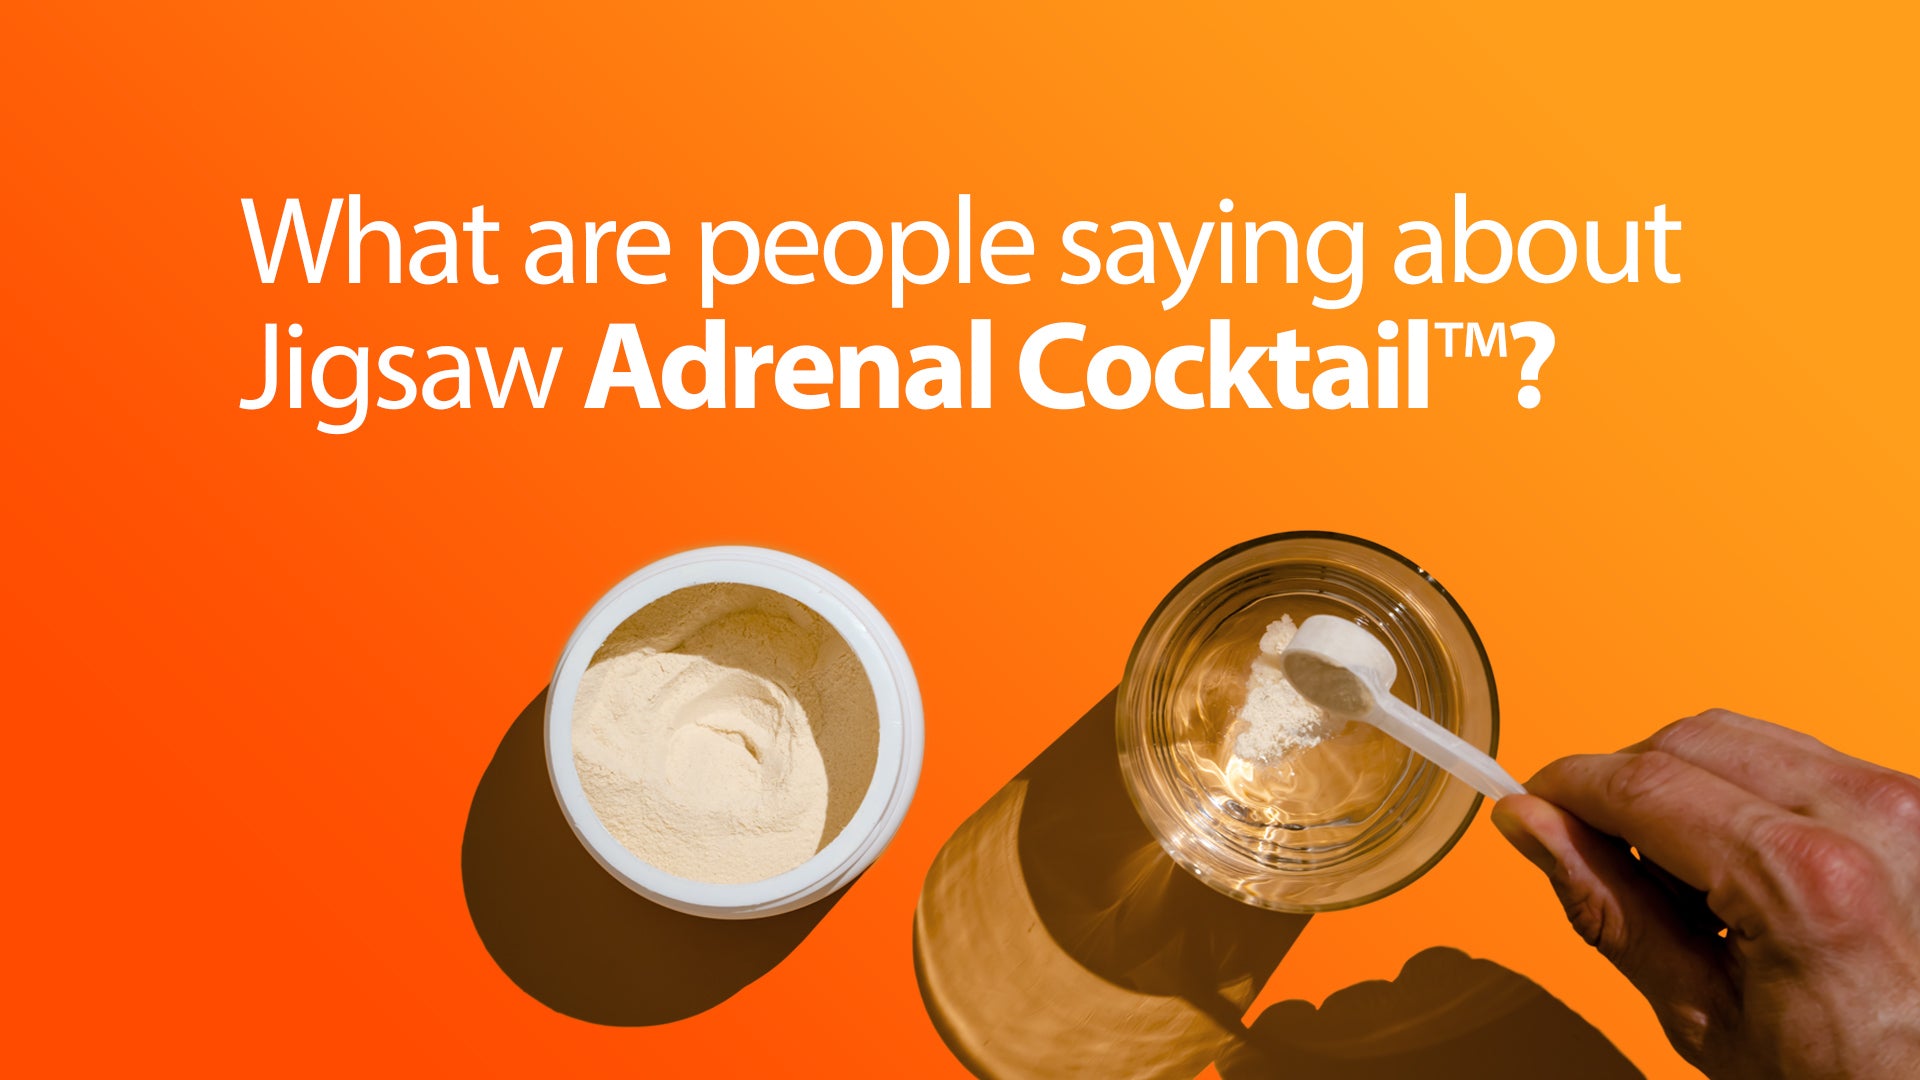 What are people saying about Jigsaw Adrenal Cocktail?